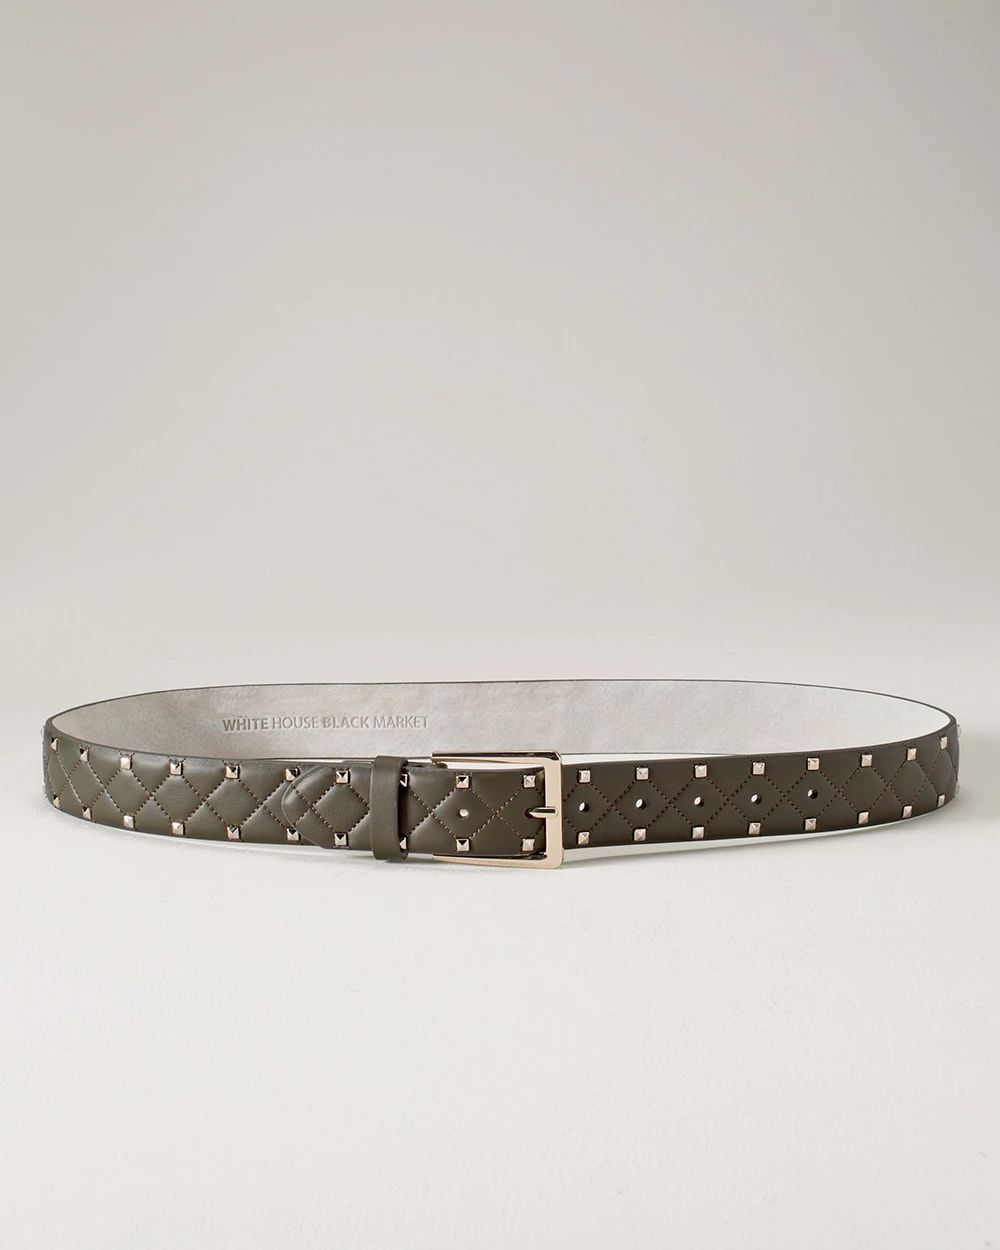 Quilted Stud Belt click to view larger image.